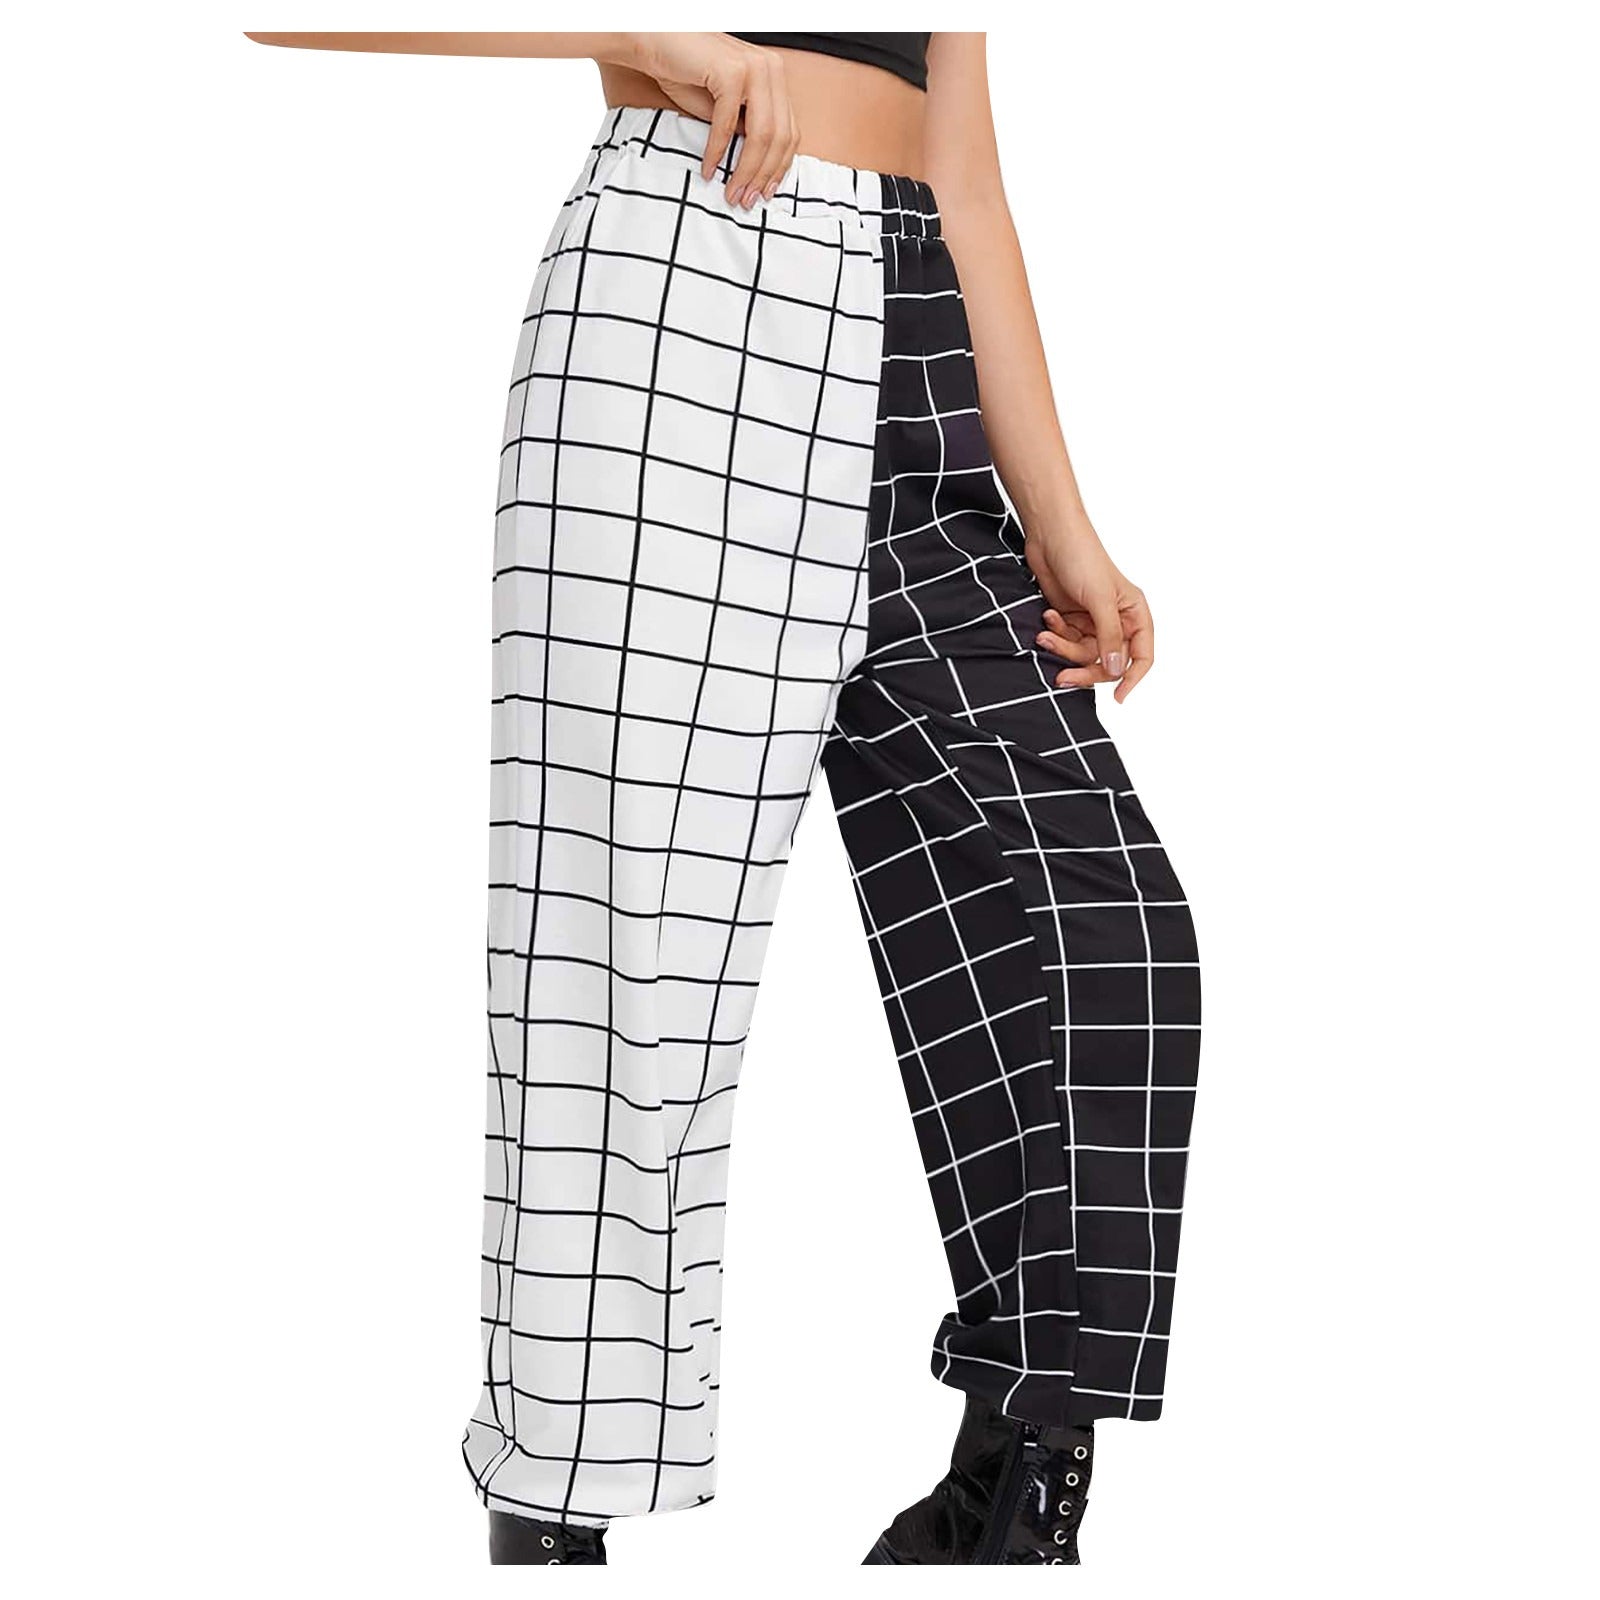 Women's Gothic Cargo Pants With Black-White Checkerboard Print / High Waist Long Pants - HARD'N'HEAVY